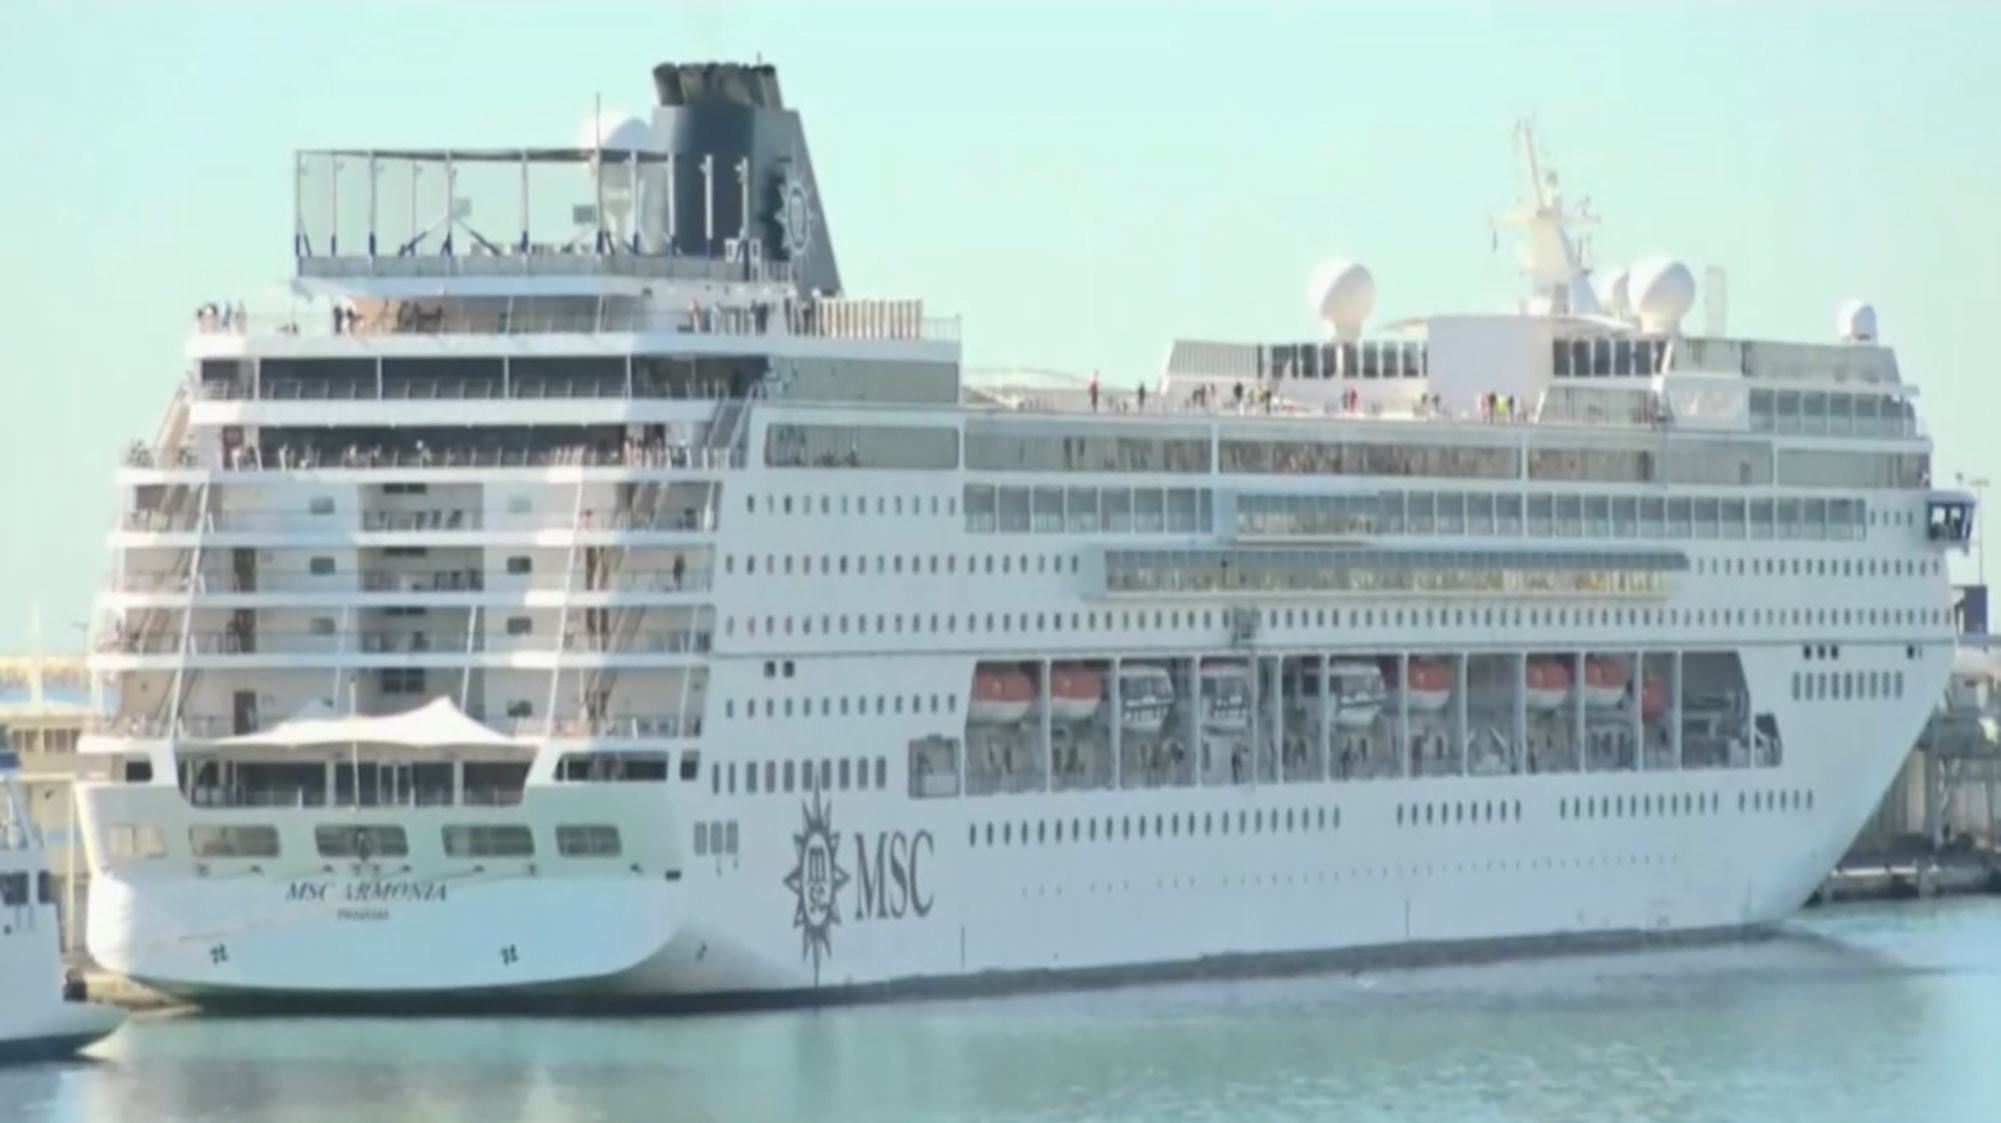 A cruise ship remains detained in Barcelona with 69 Bolivianos on board without valid documents